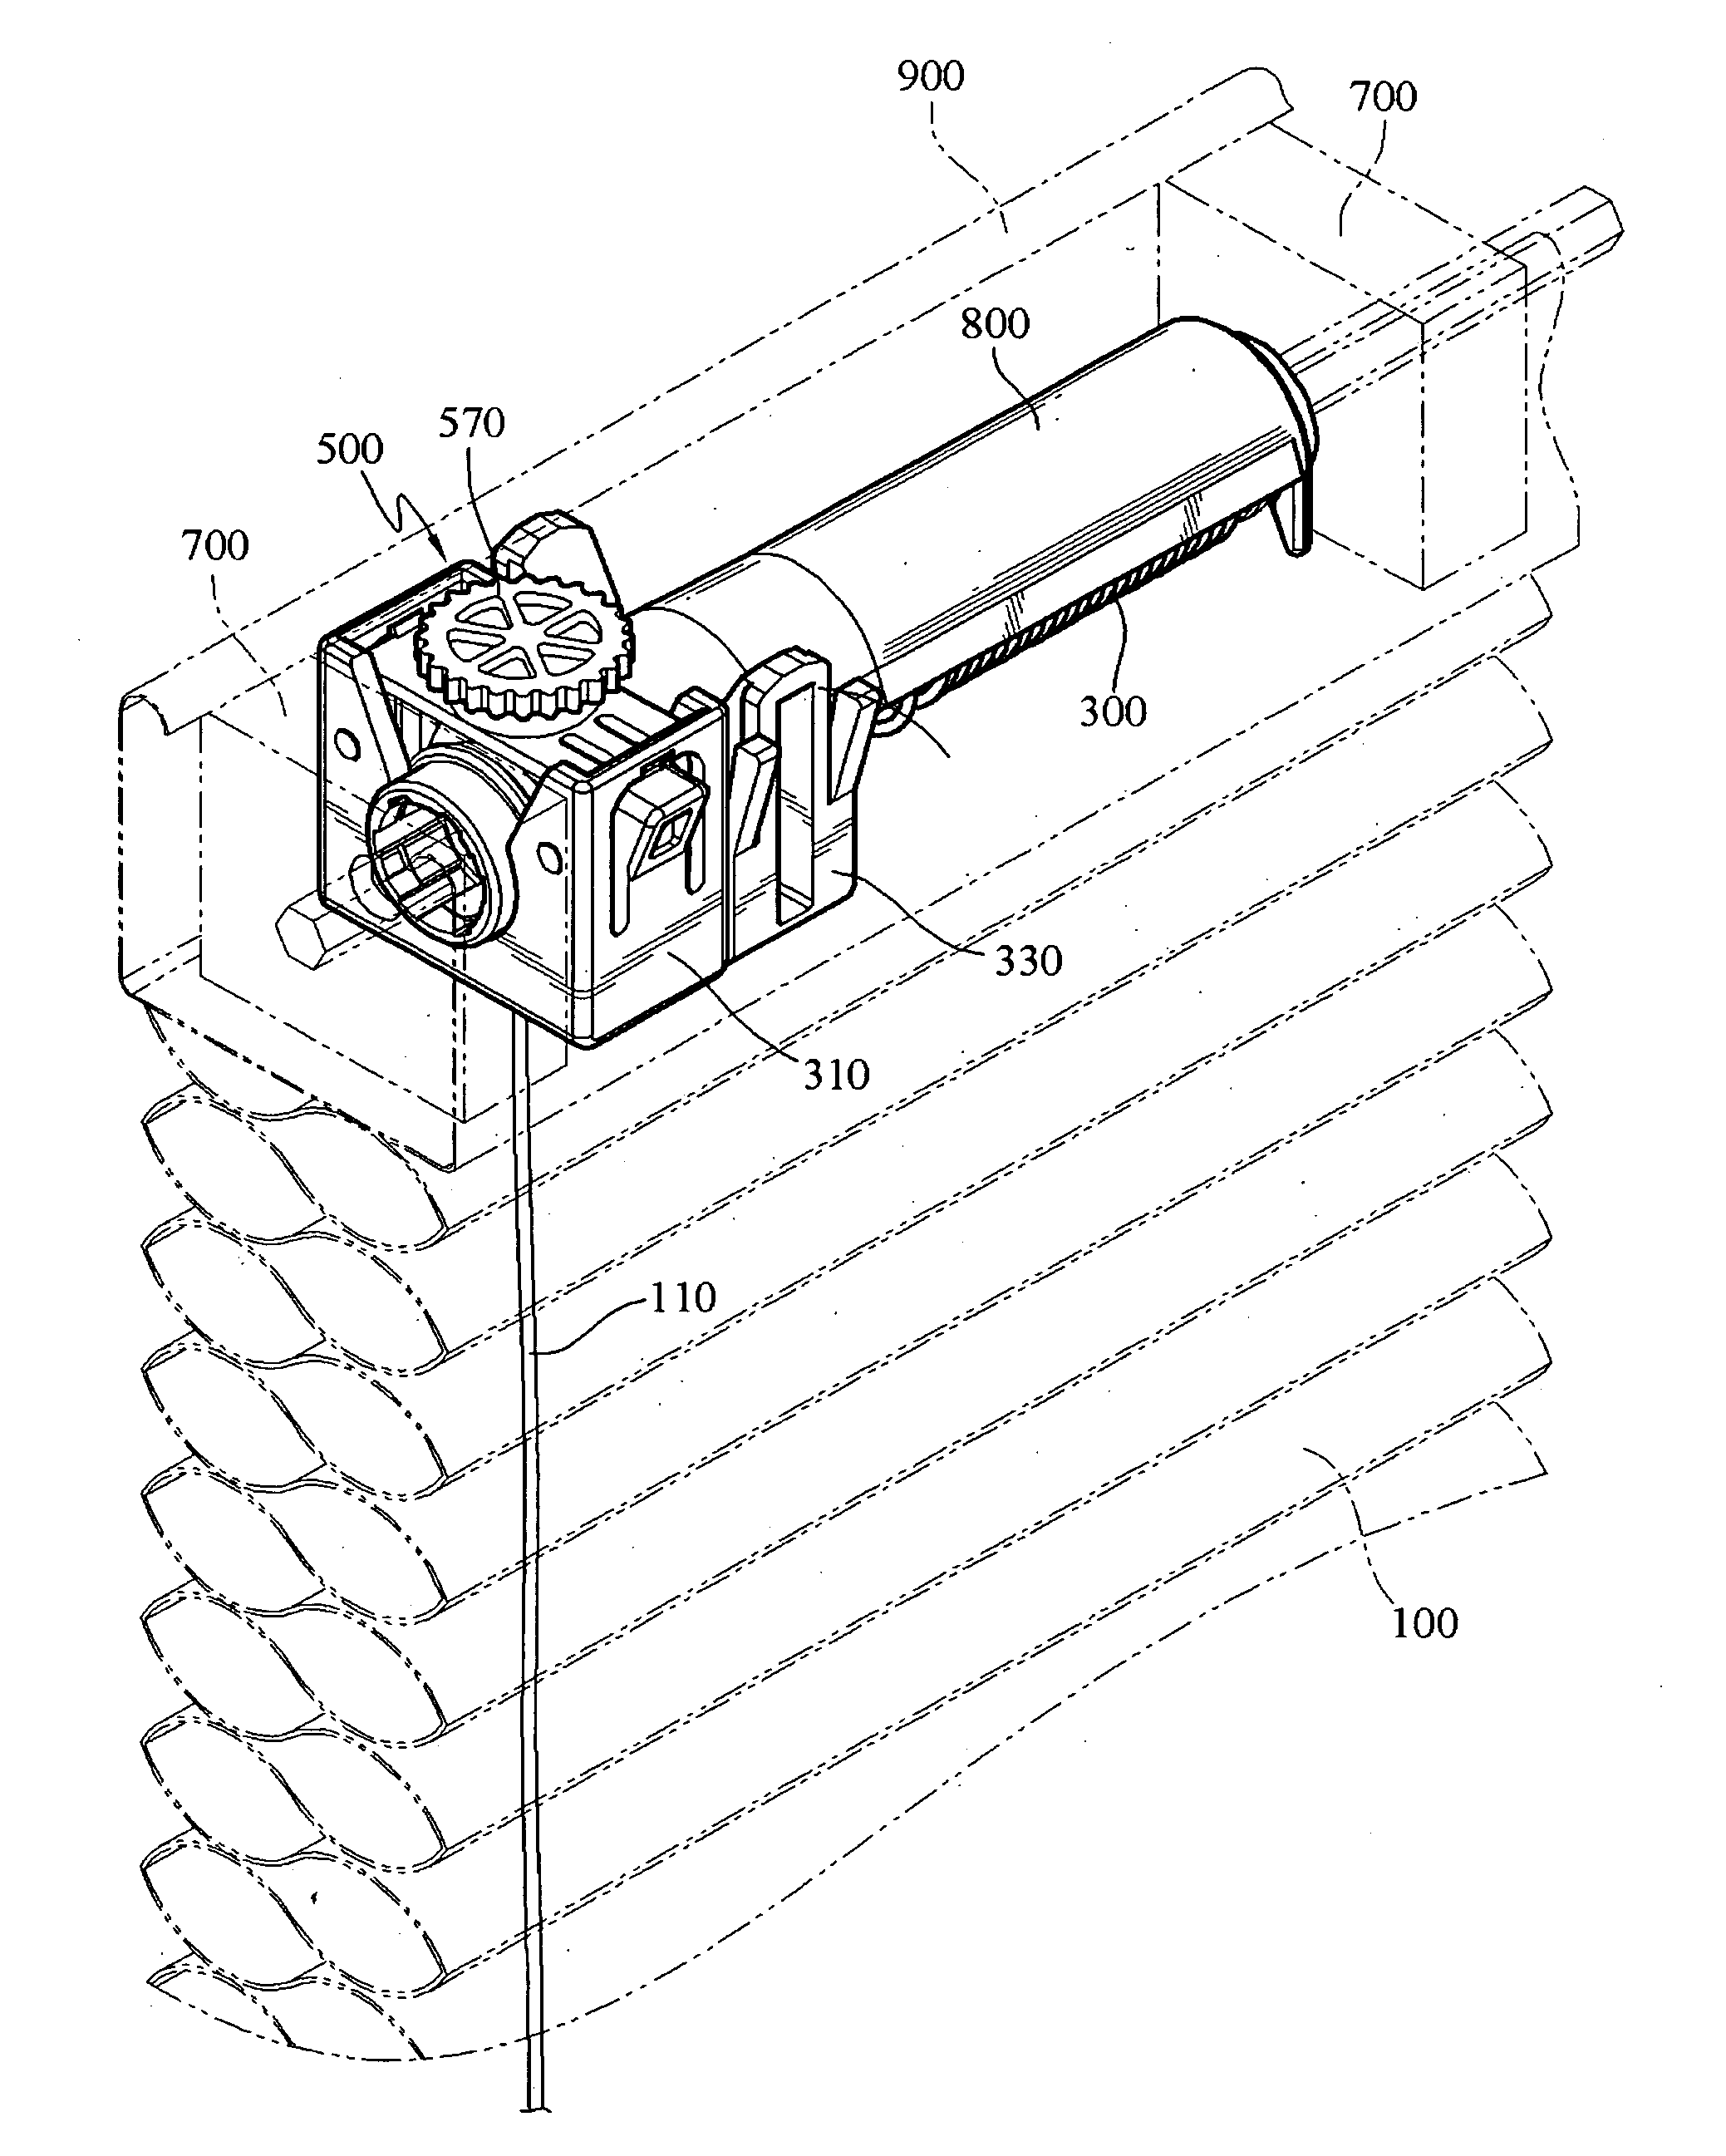 Device for winding suspension cord of blind